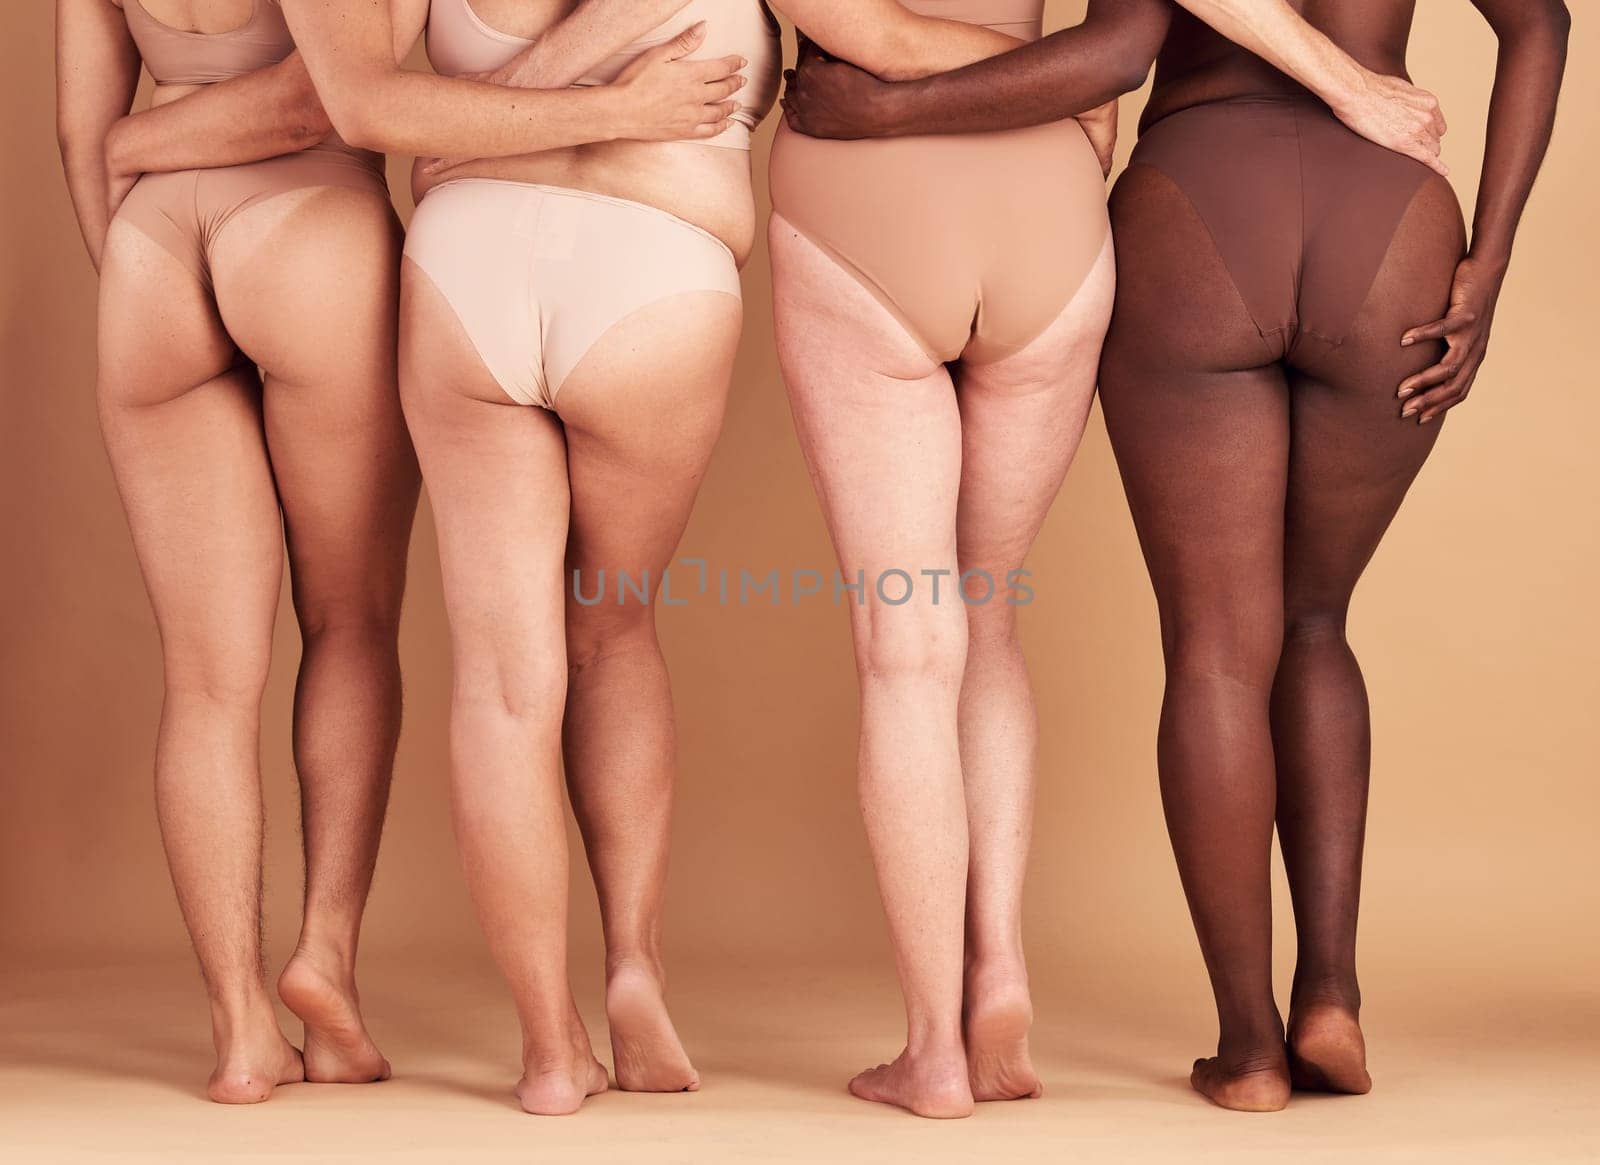 Women group, lingerie and butt in studio for wellness, fashion and diversity with plus size in unity. Back, bum and woman model team with solidarity, body positive or health for beauty by background by YuriArcurs